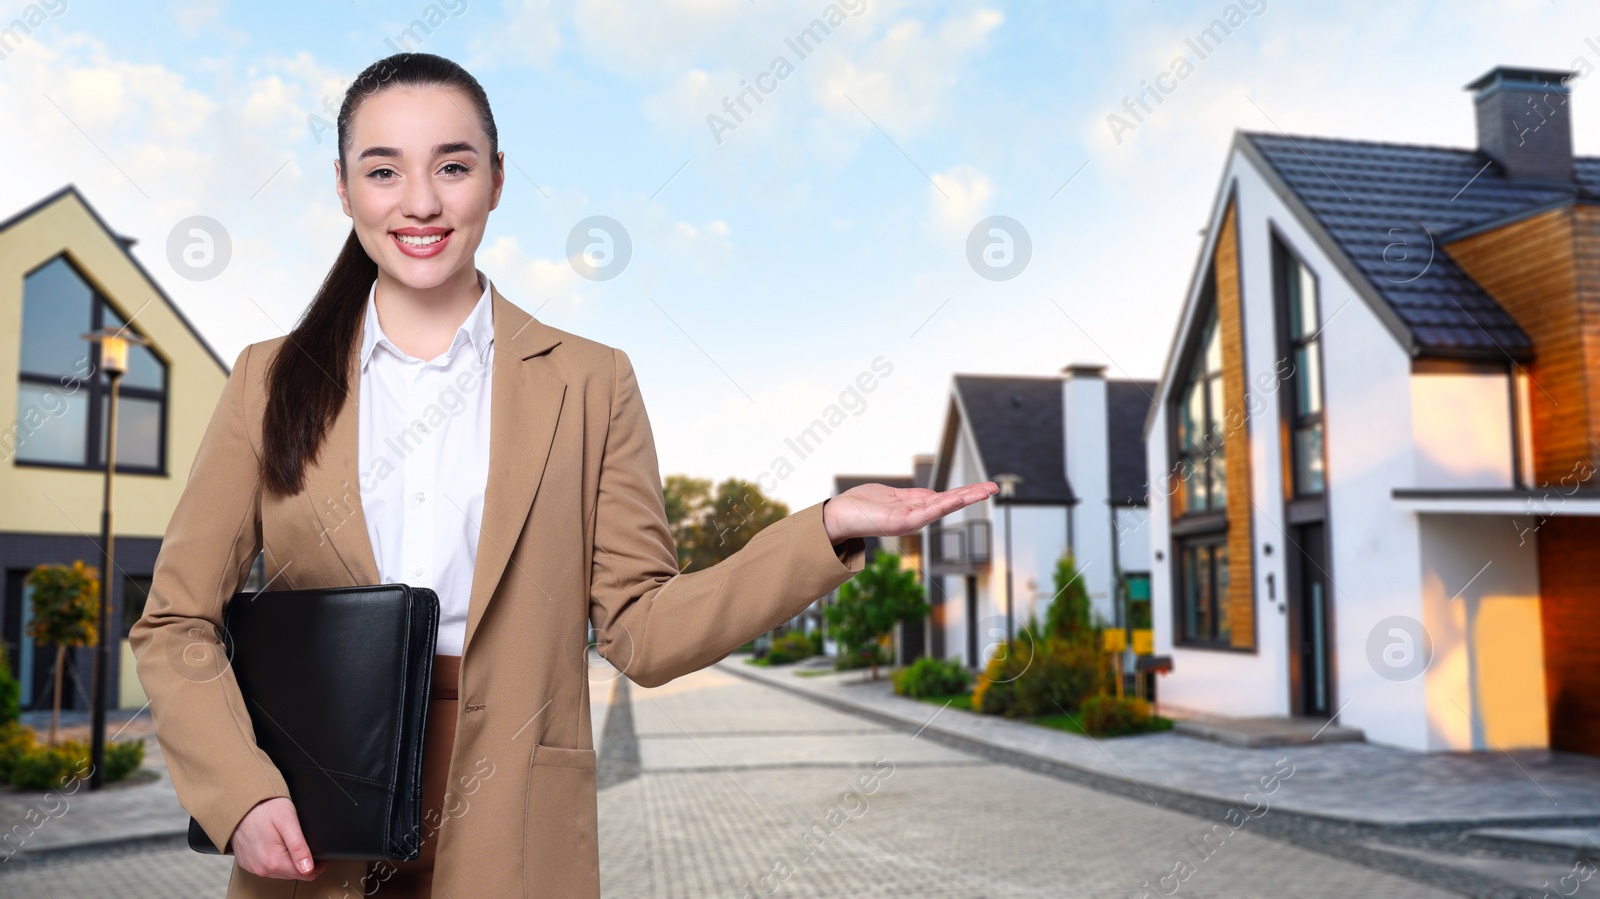 Image of Smiling real estate agent with portfolio outdoors, space for text. Beautiful houses on street